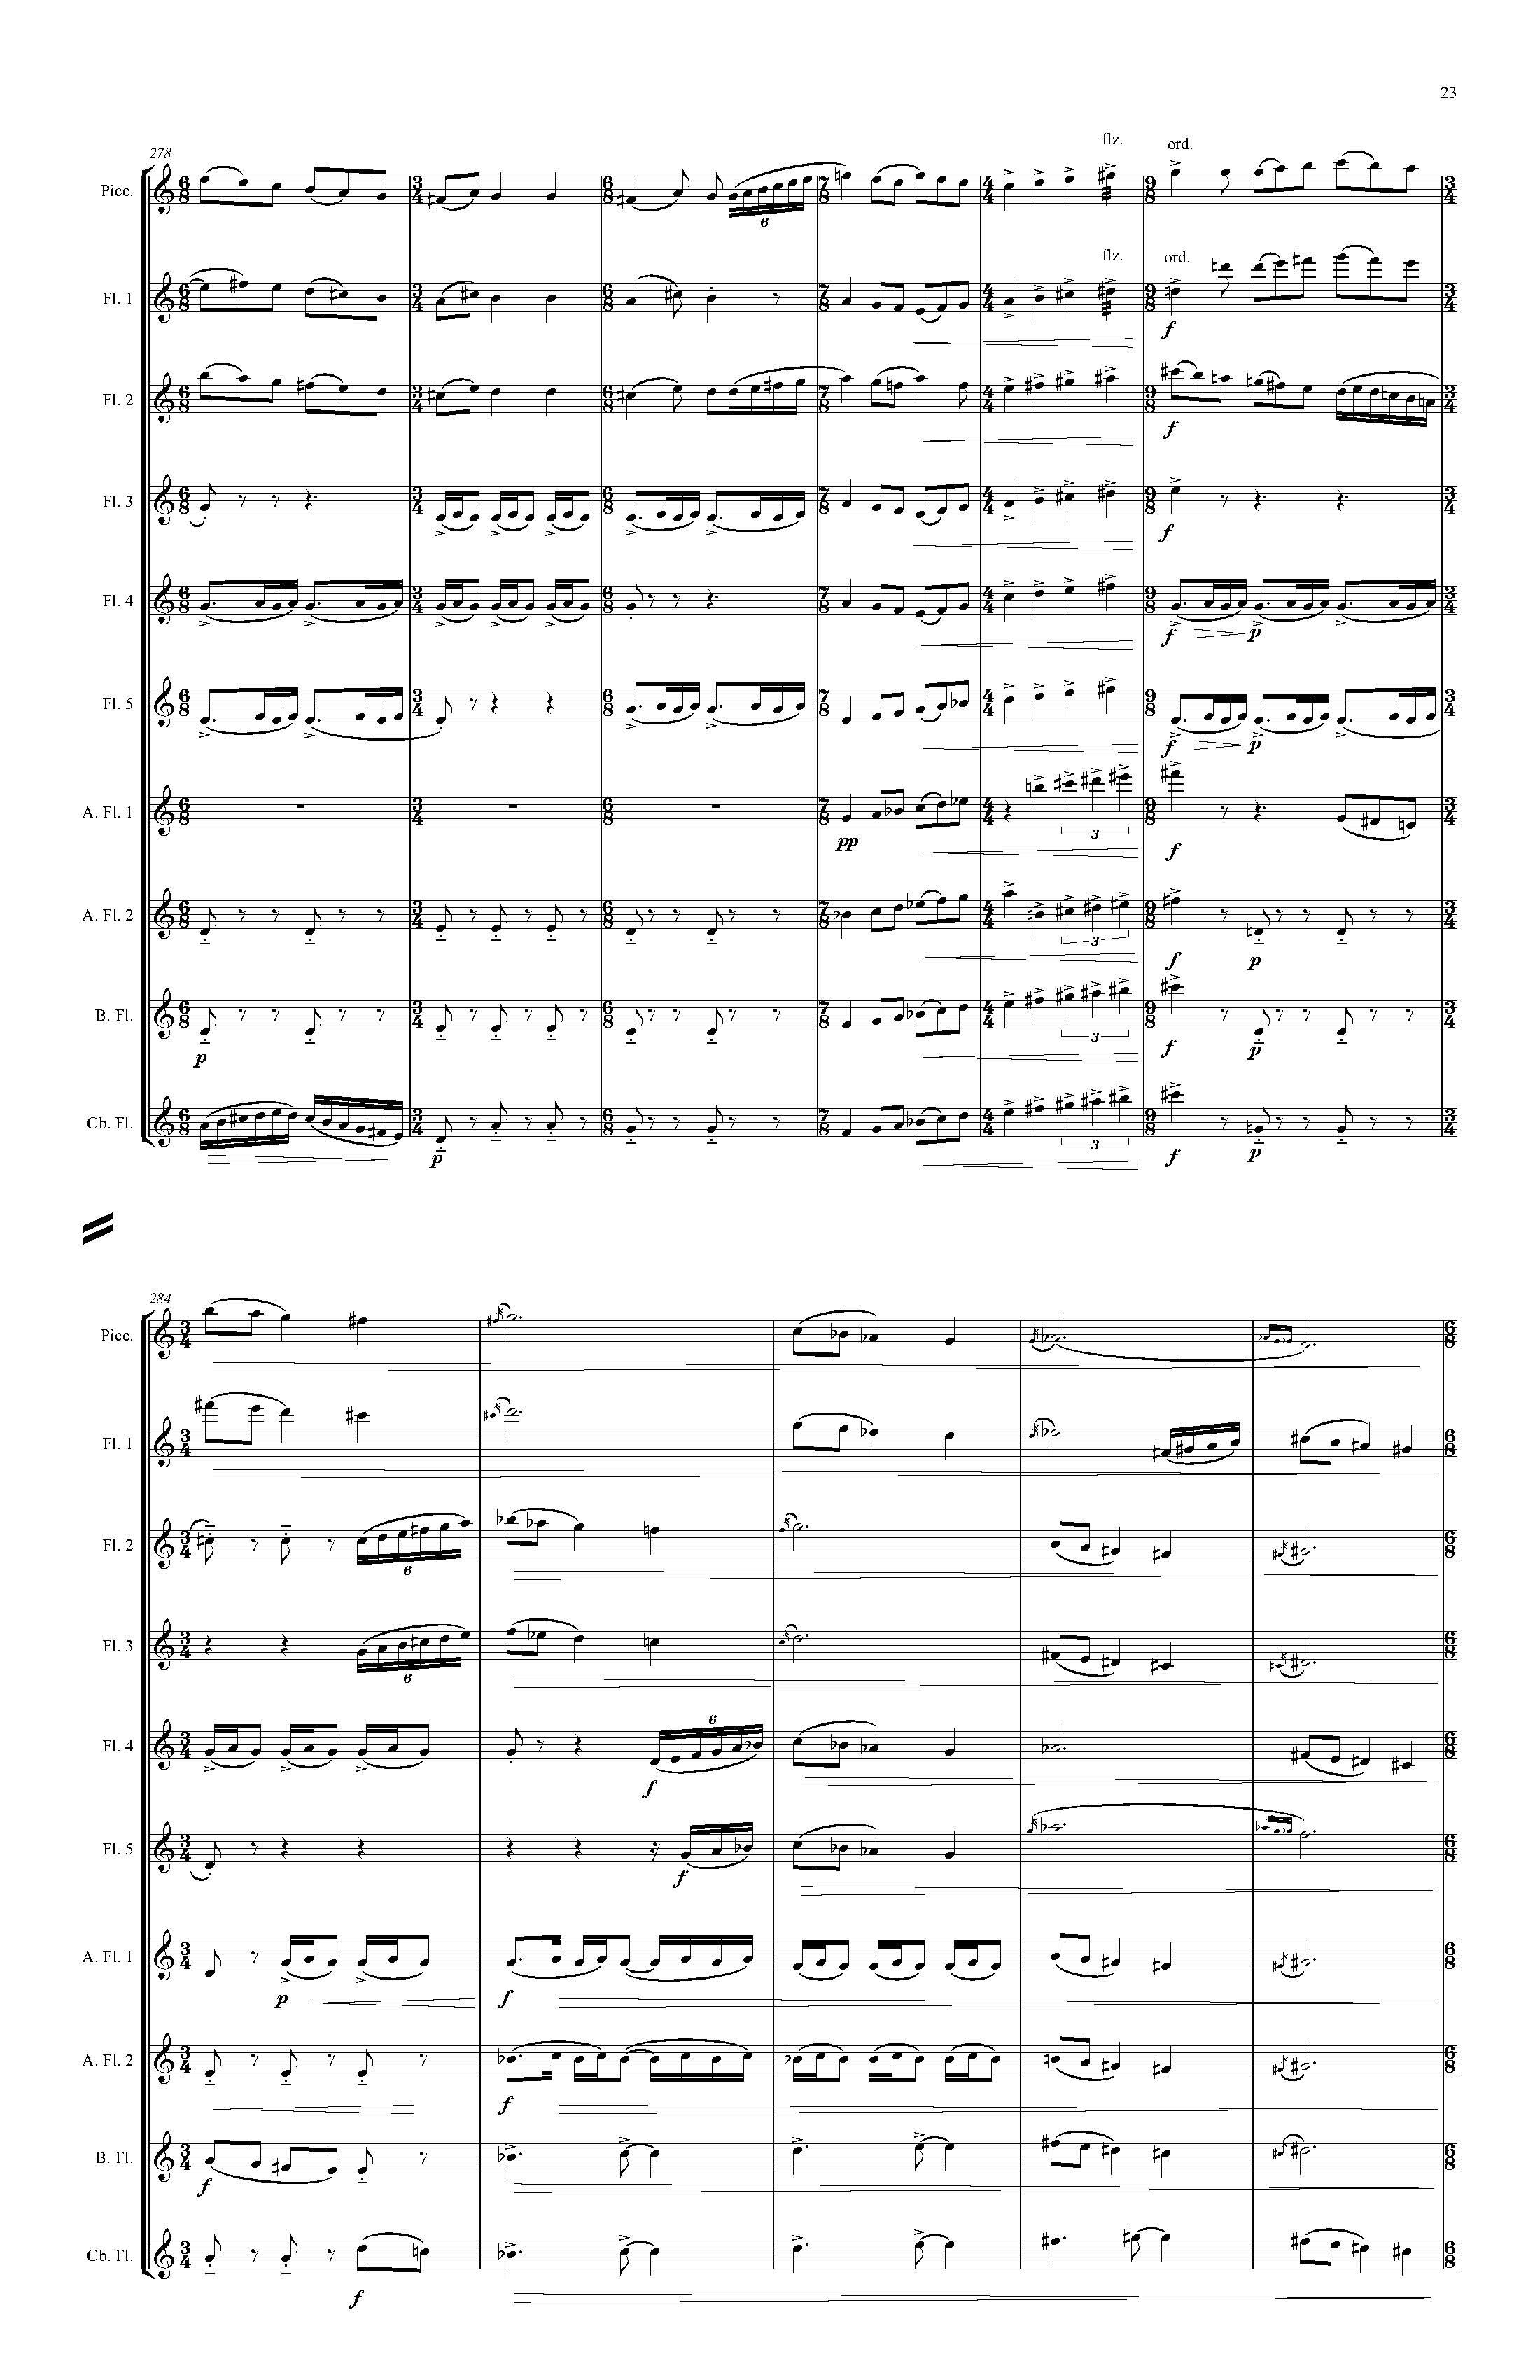 PIPES - Complete Score_Page_29.jpg